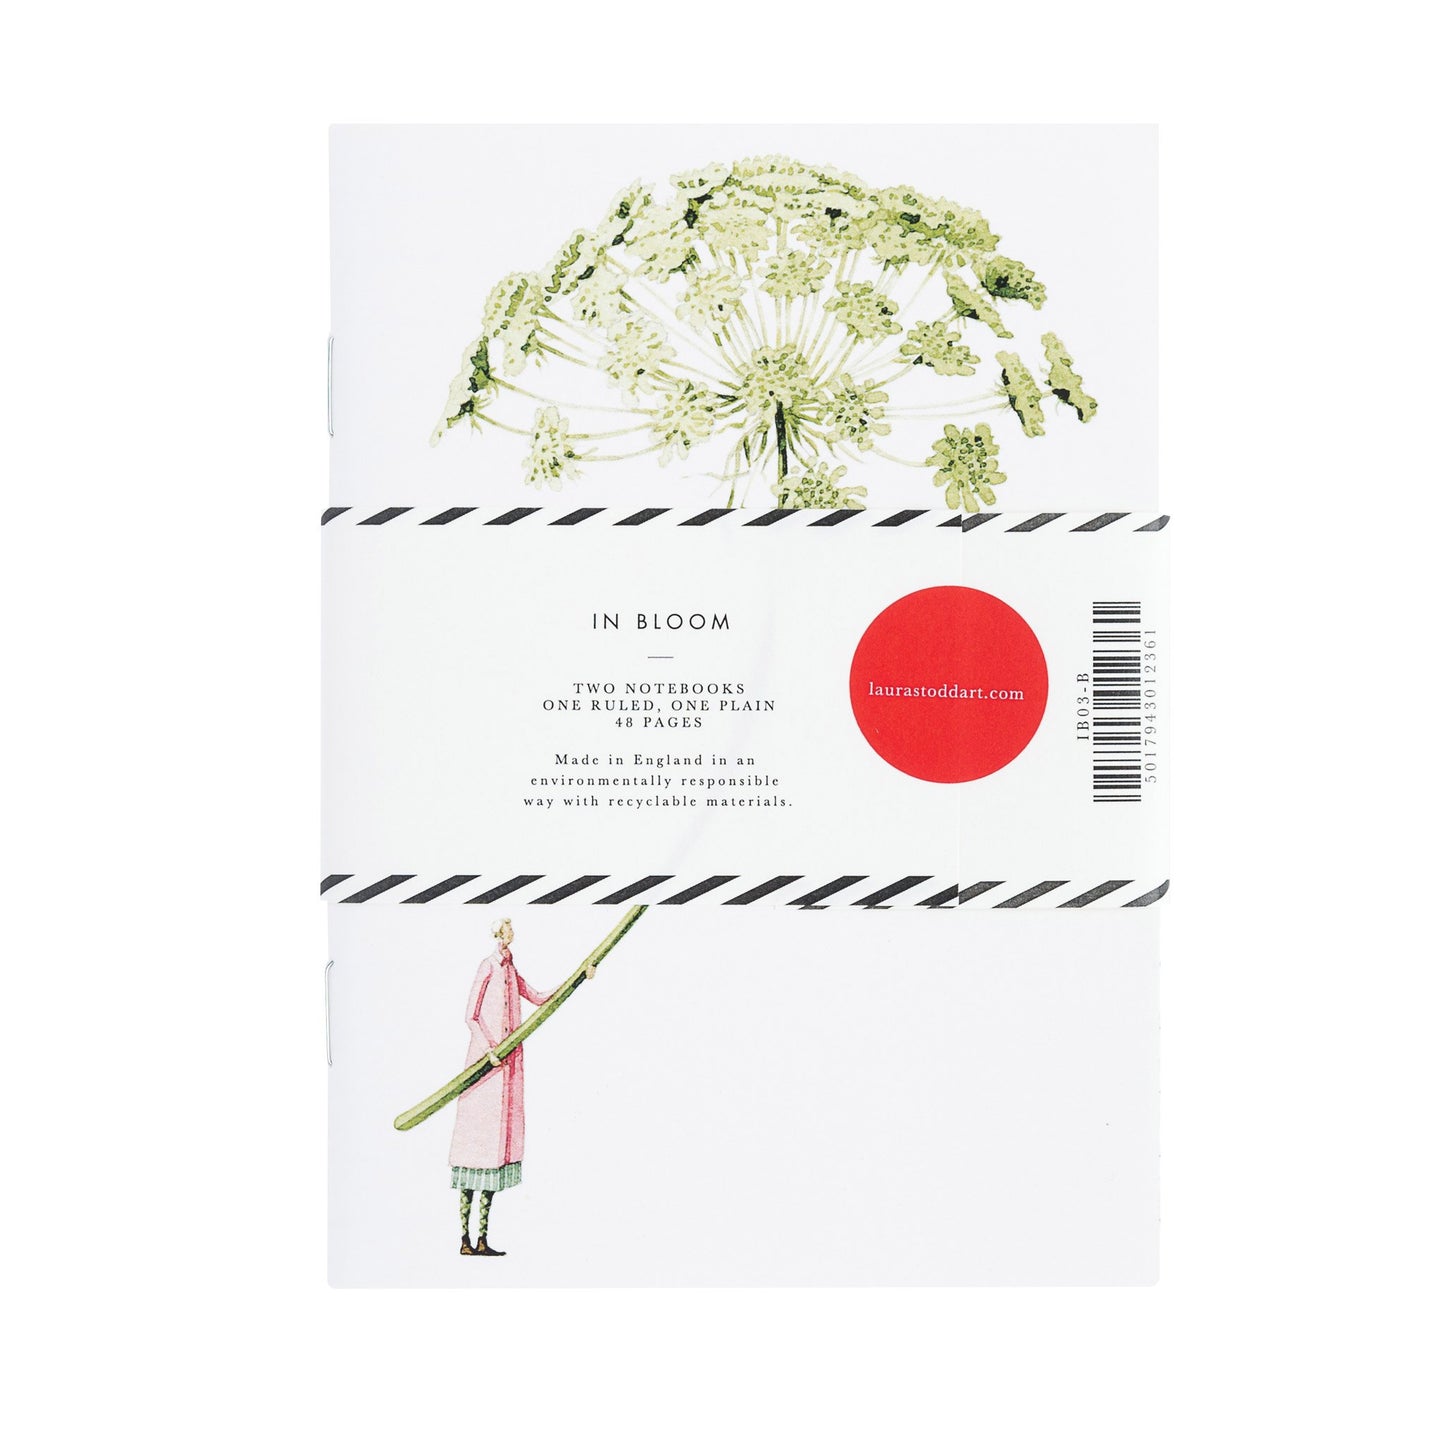 fsc paper, notebooks, flowers, green flowers, illustration, made in england, environmentally responsible, recyclable